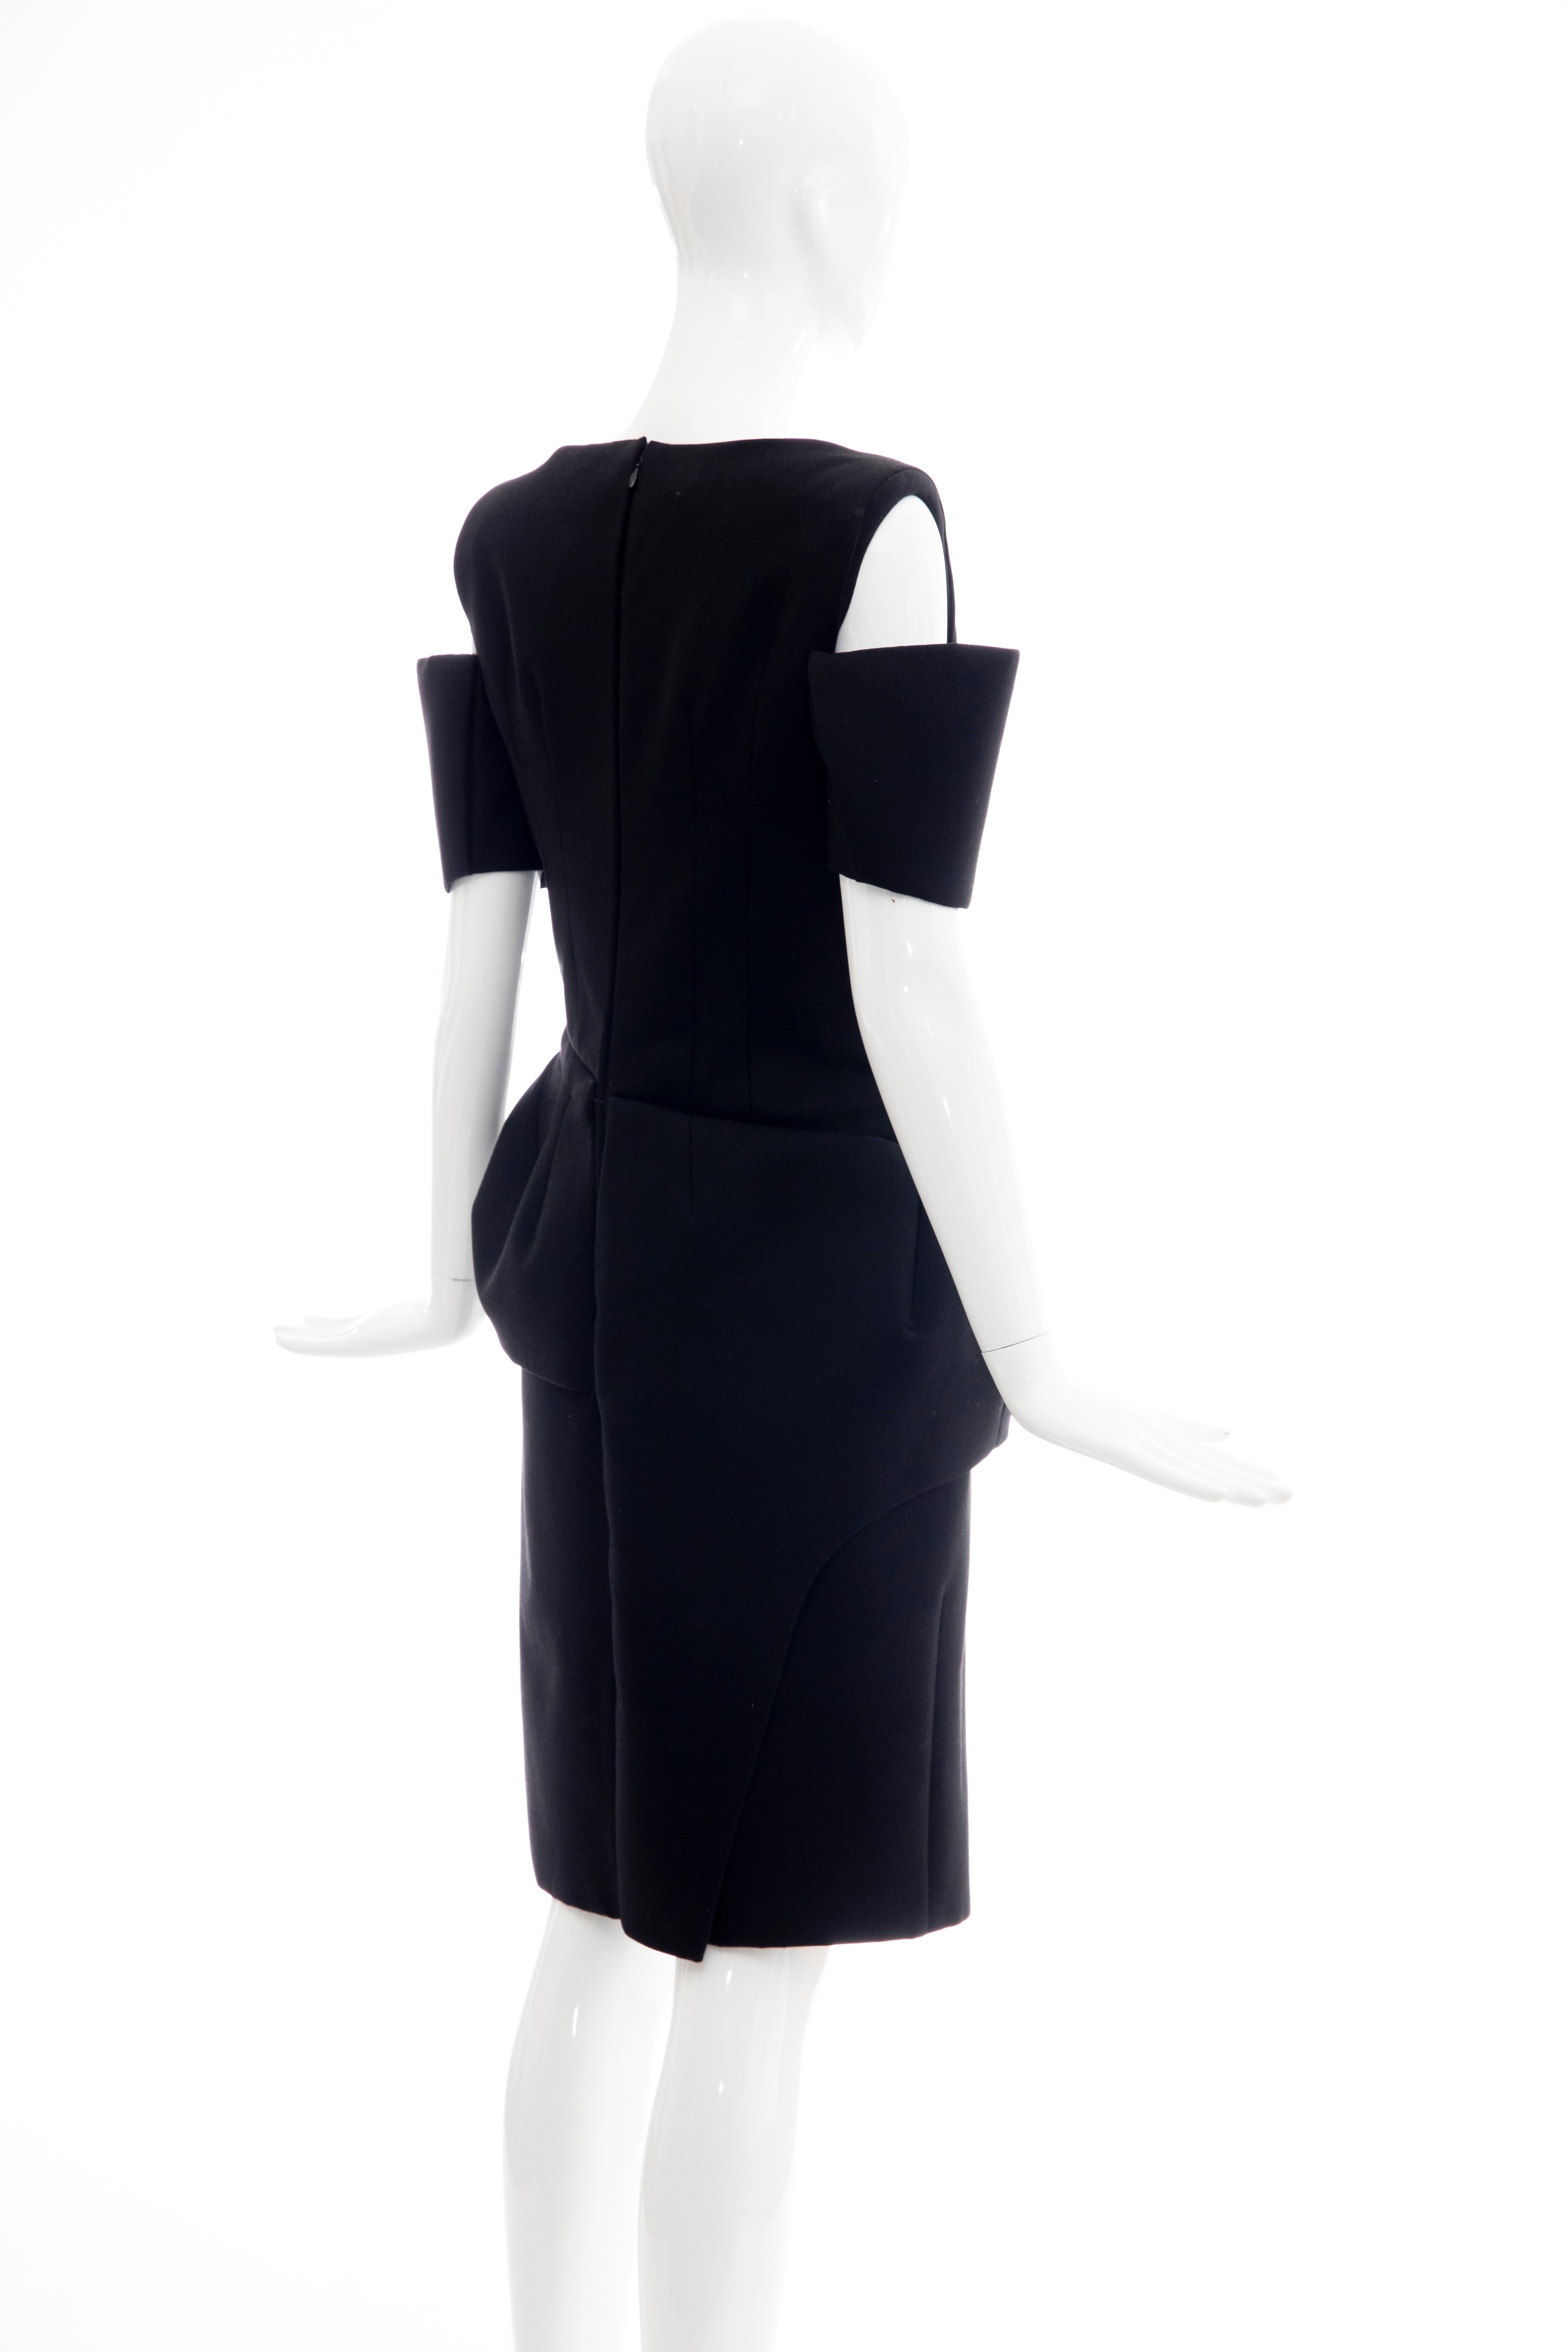 Nicolas Ghesquière for Balenciaga Runway Black Wool Structured Dress, Fall 2008 In Excellent Condition For Sale In Cincinnati, OH